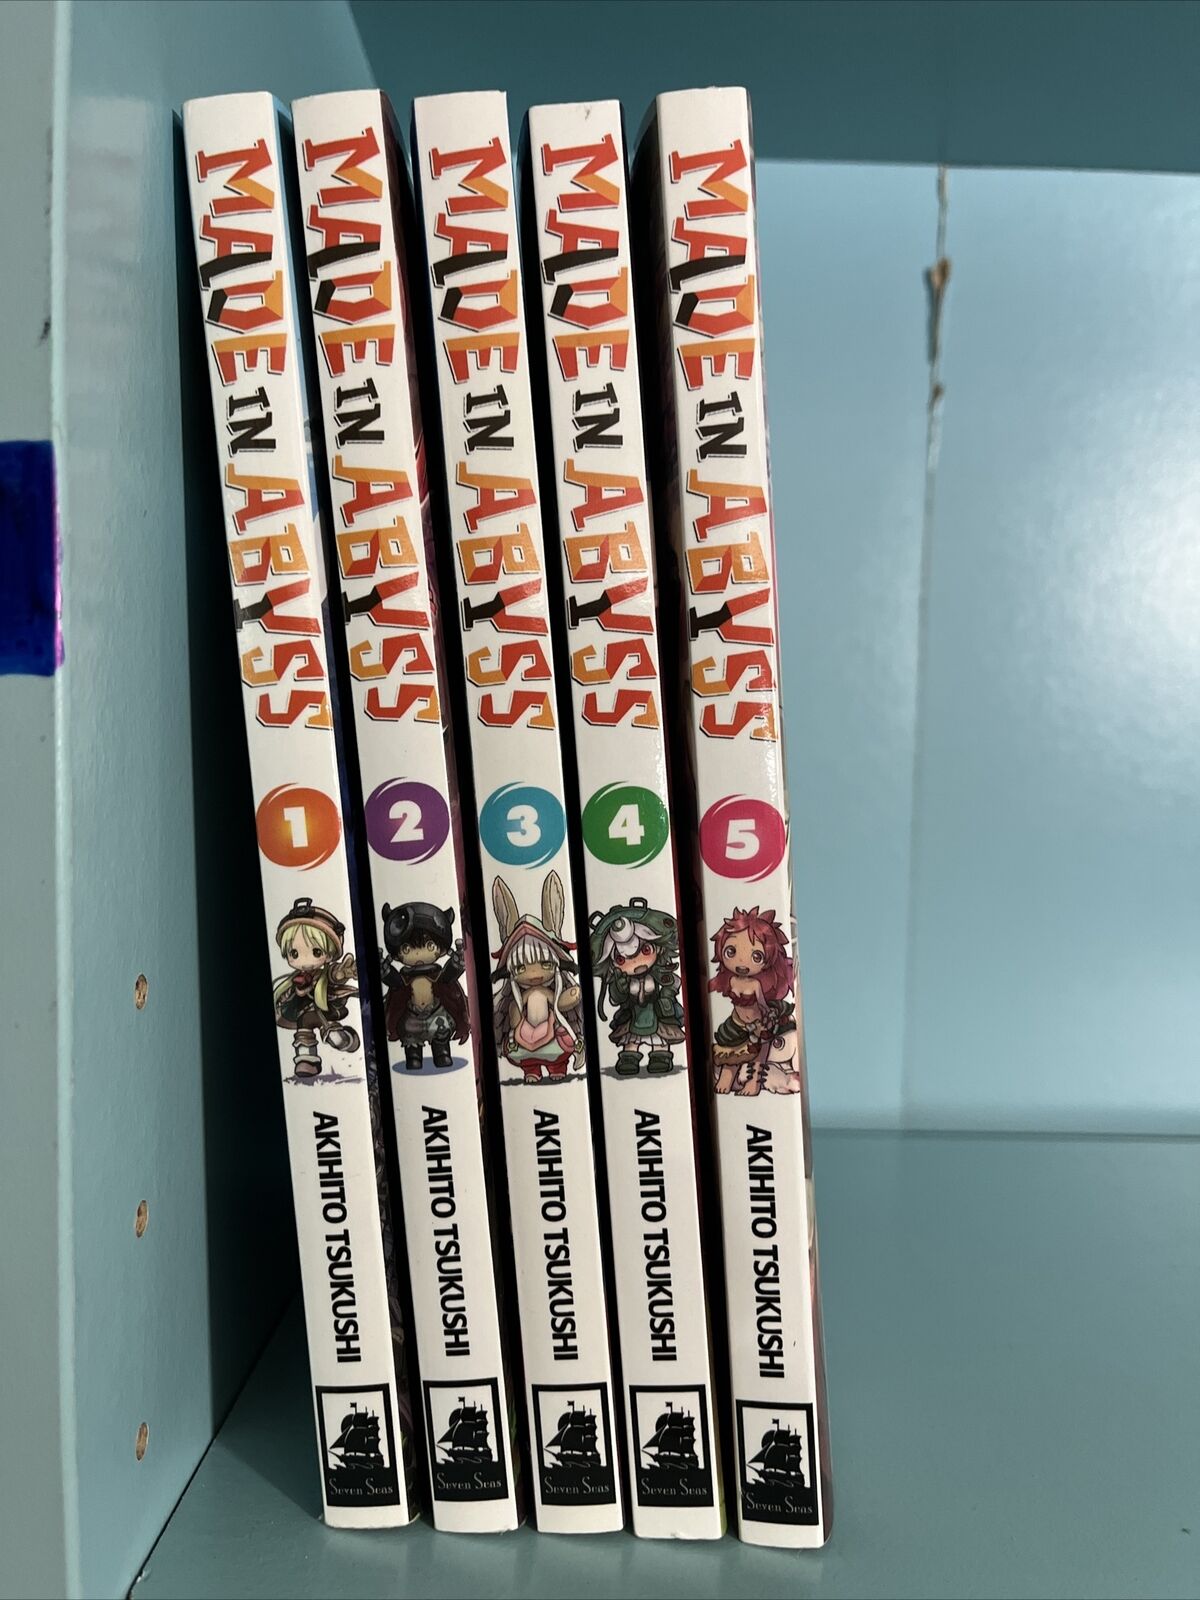 Made in Abyss volumes 1-2-3-4-5, manga